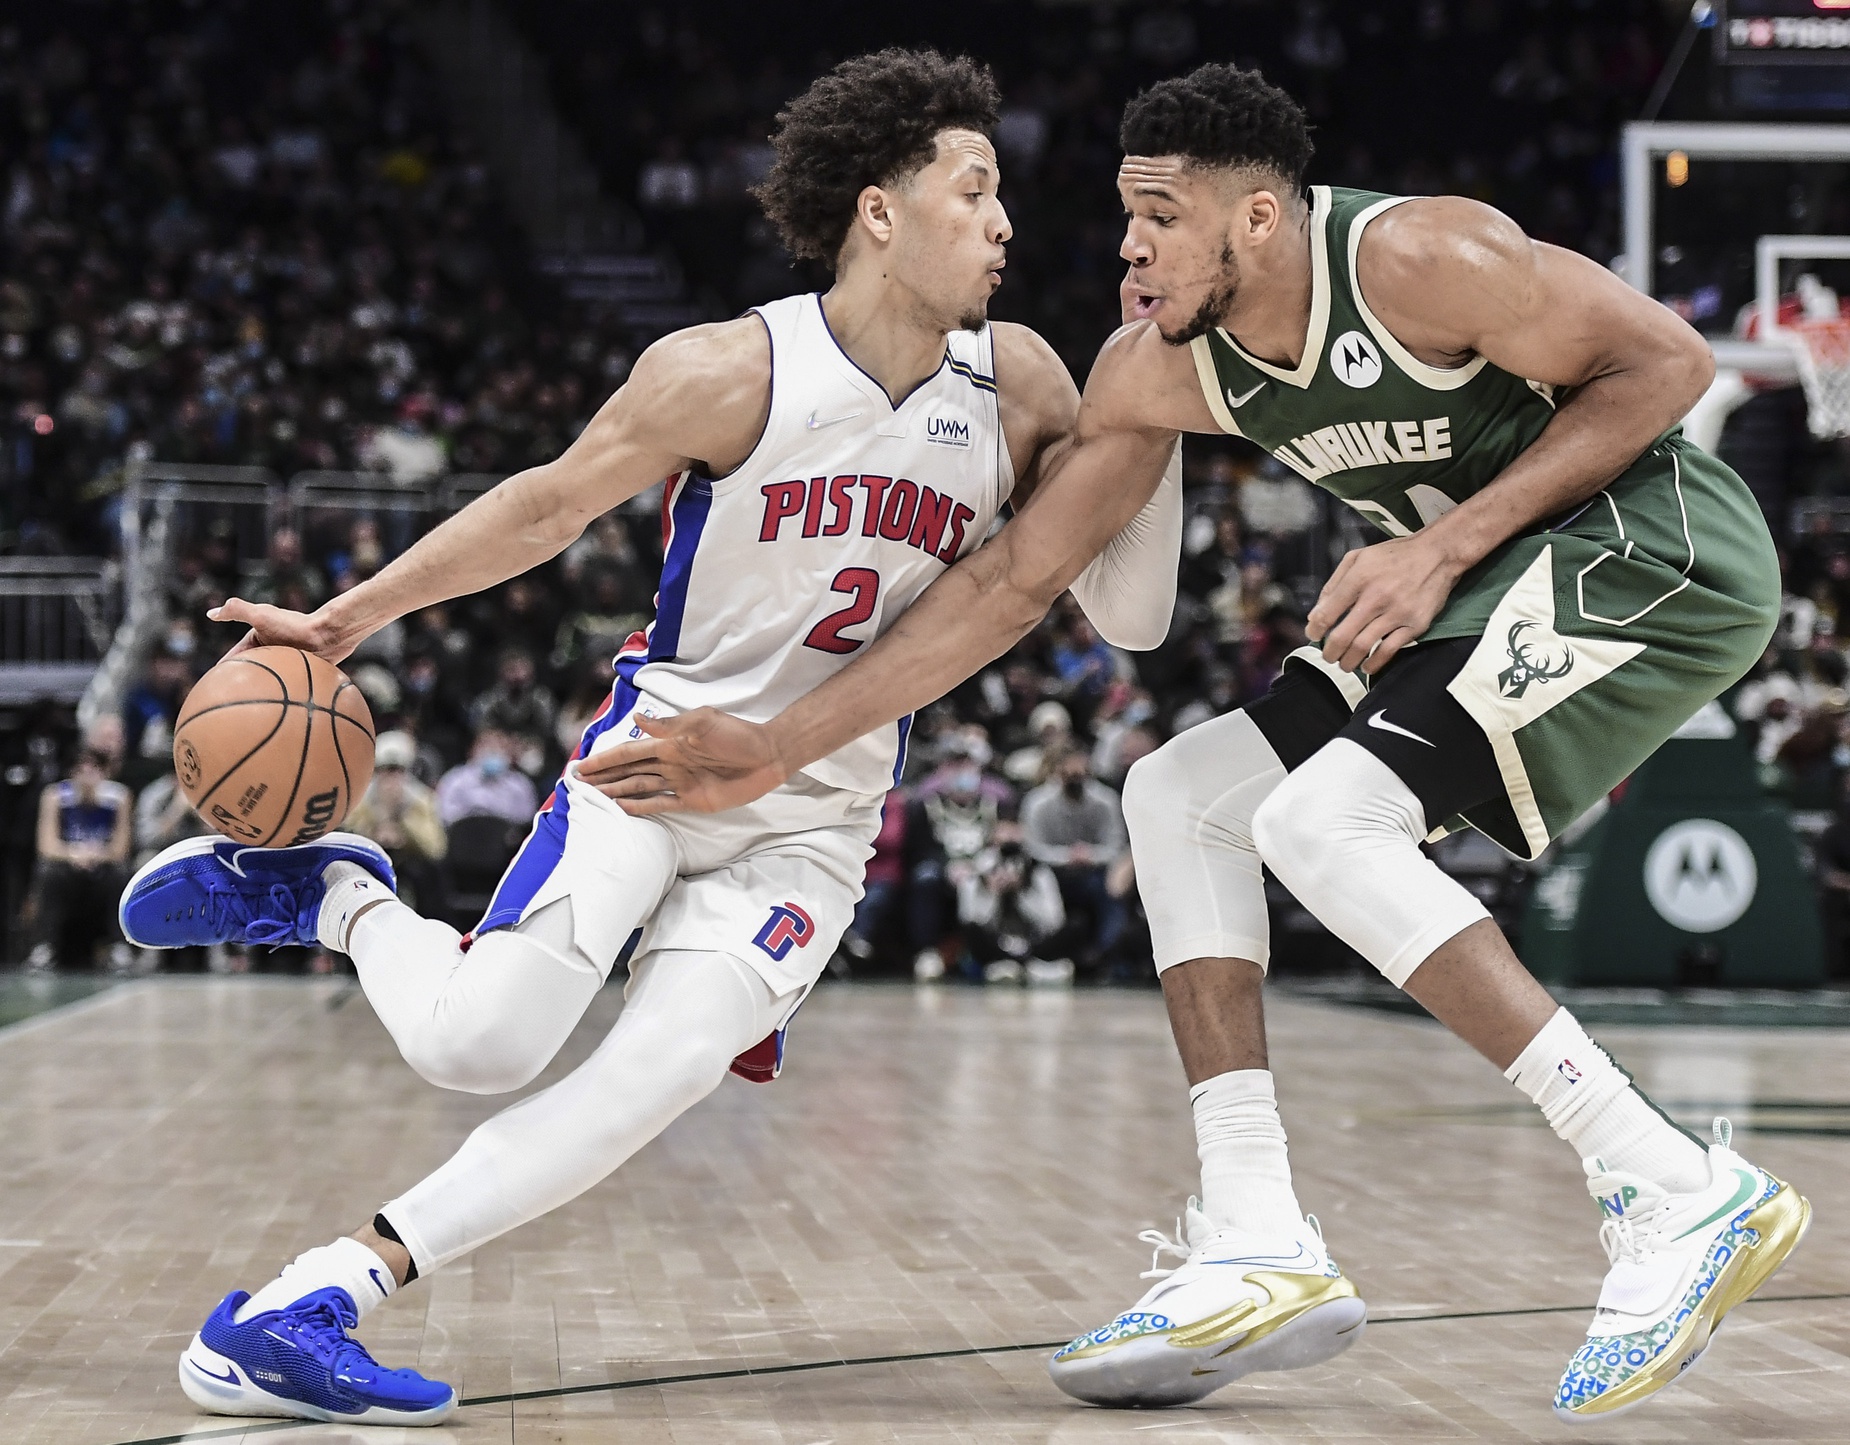 Jan 3, 2022; Milwaukee, Wisconsin, USA; Milwaukee Bucks forward Giannis Antetokounmpo (34) steals the ball from Detroit Pistons guard Cade Cunningham (2) in the fourth quarter at Fiserv Forum. Mandatory Credit: Benny Sieu-USA TODAY Sports